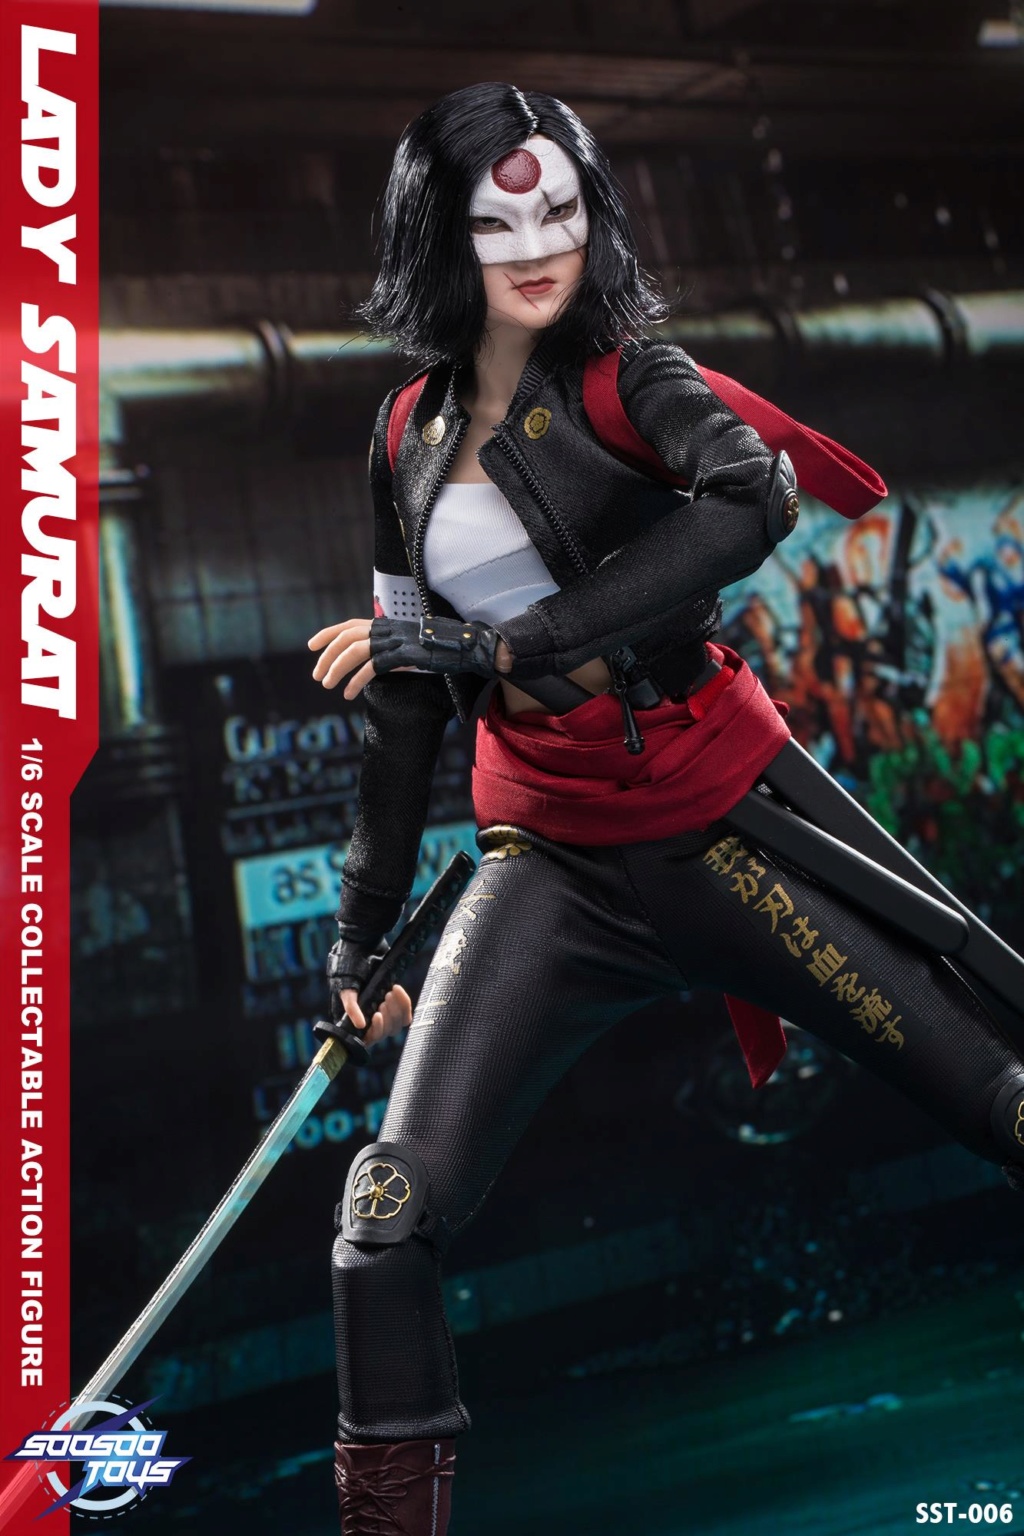 LadySamurai - NEW PRODUCT: Soosootoys 1/6 scale collectible SST-006 Lady Samurai 5150